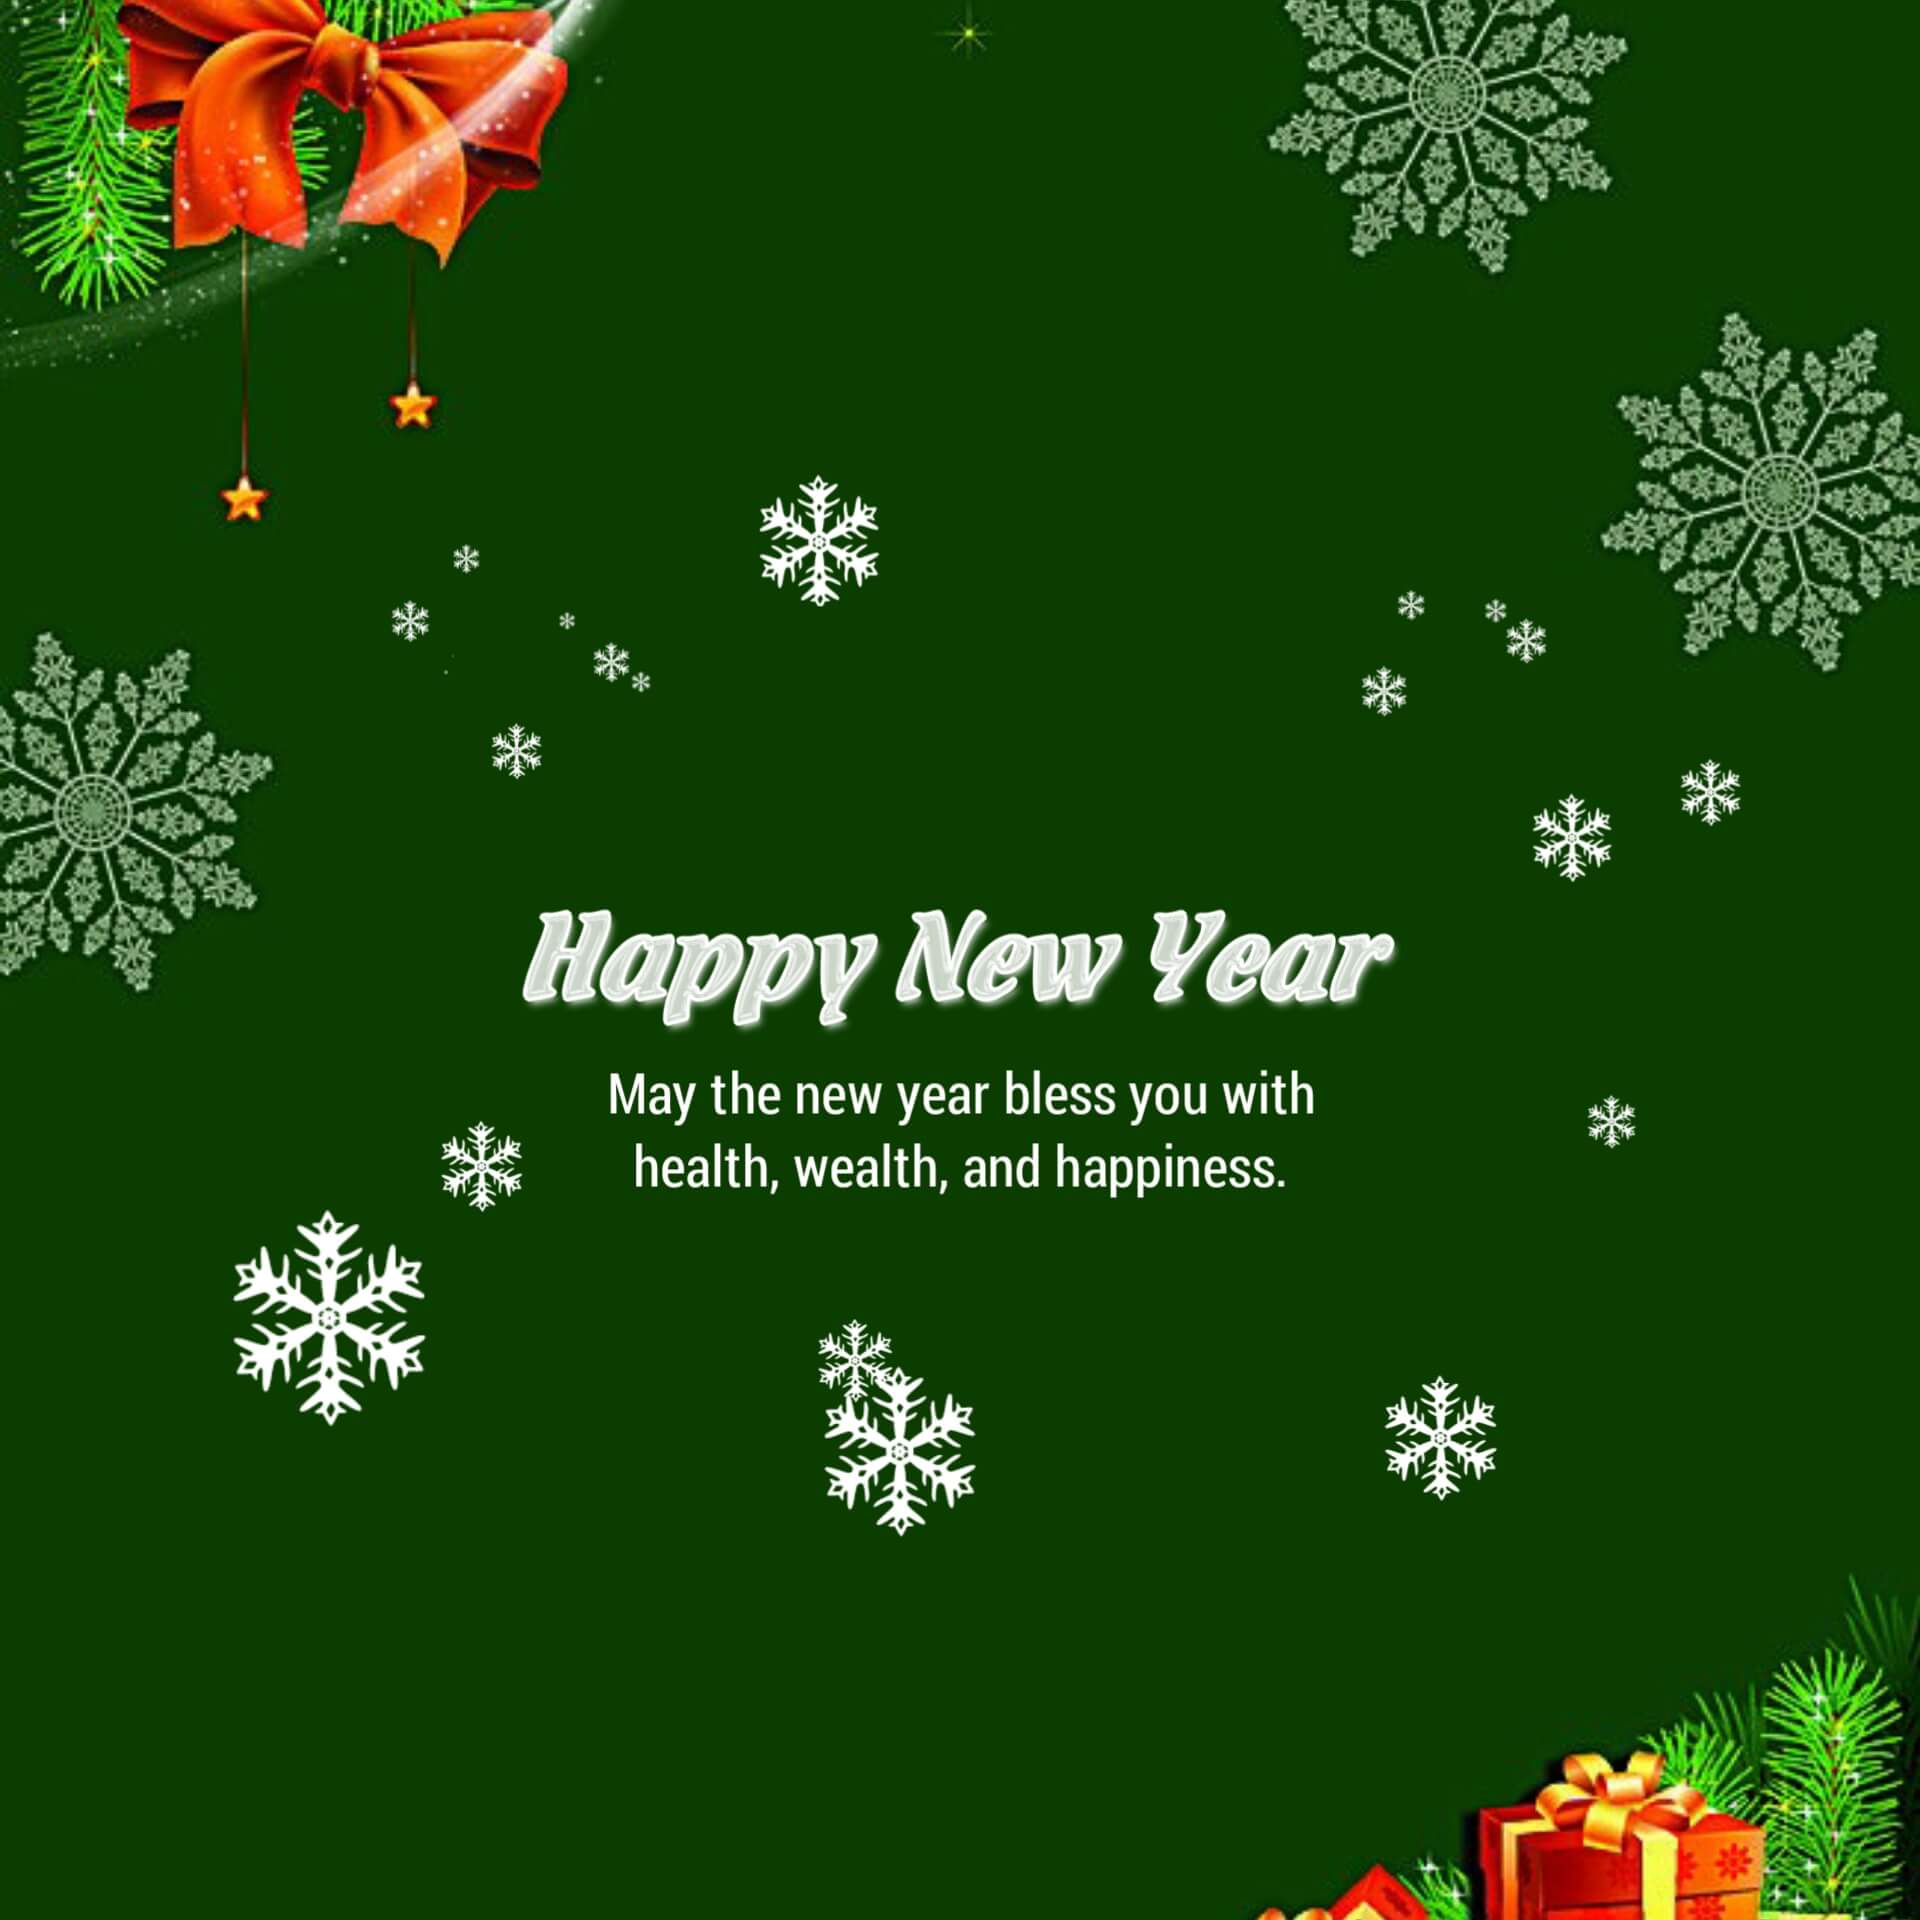 Simple New Year Images